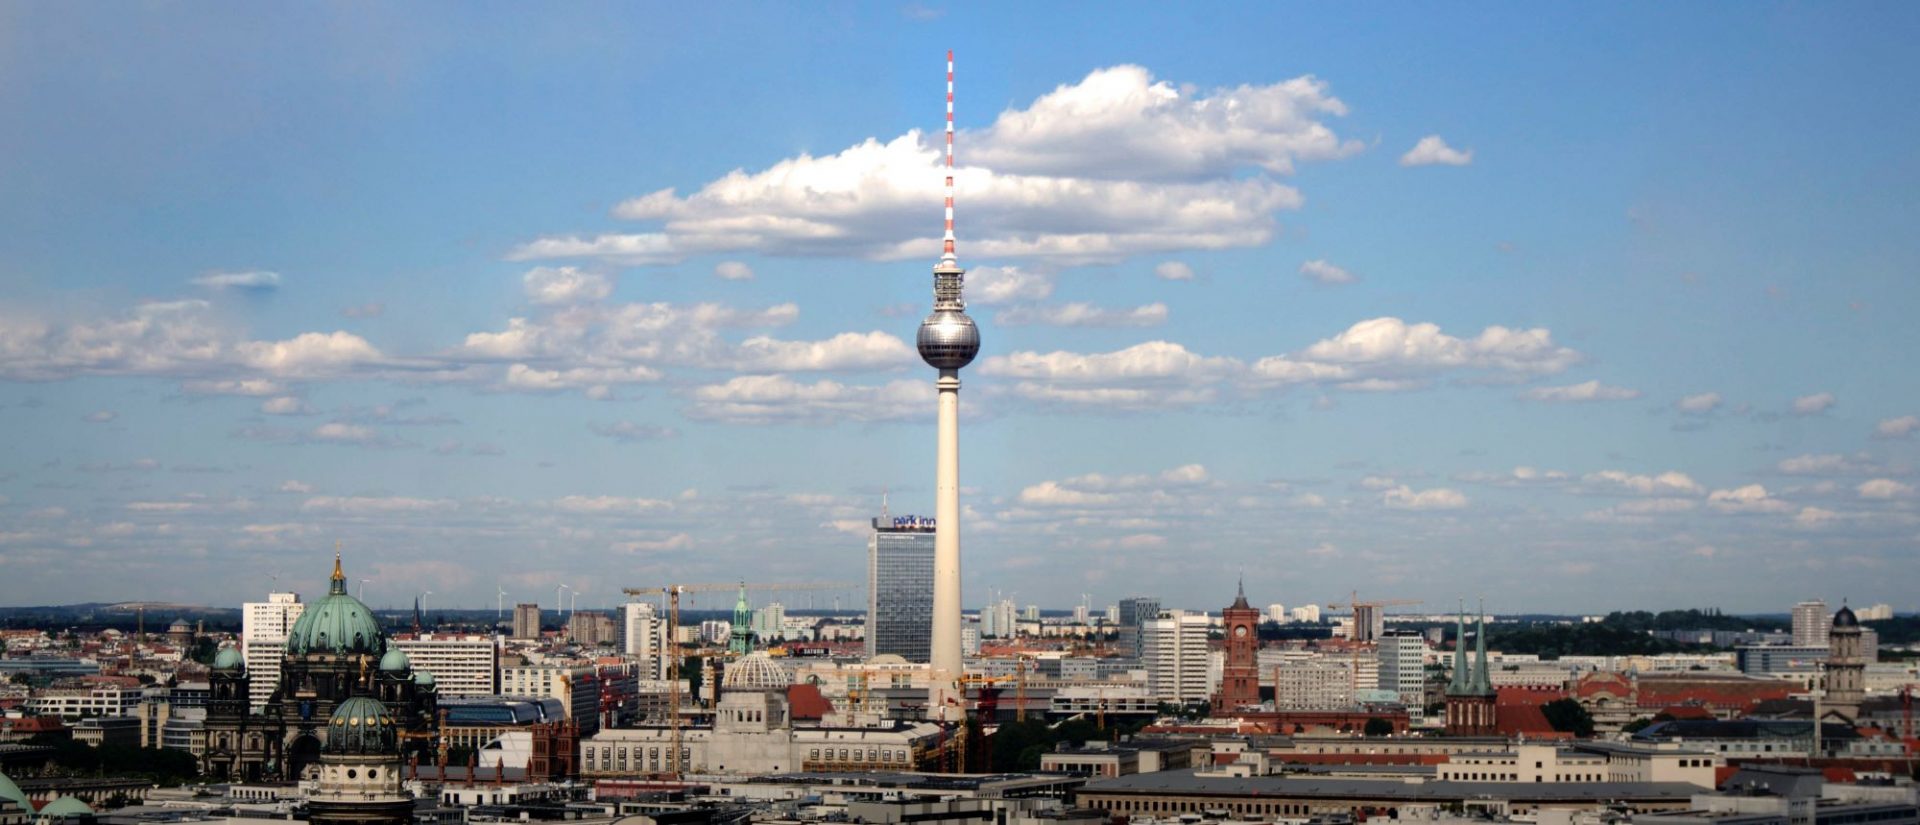 20 Best Things to Do in Berlin - Endless Travel Destinations